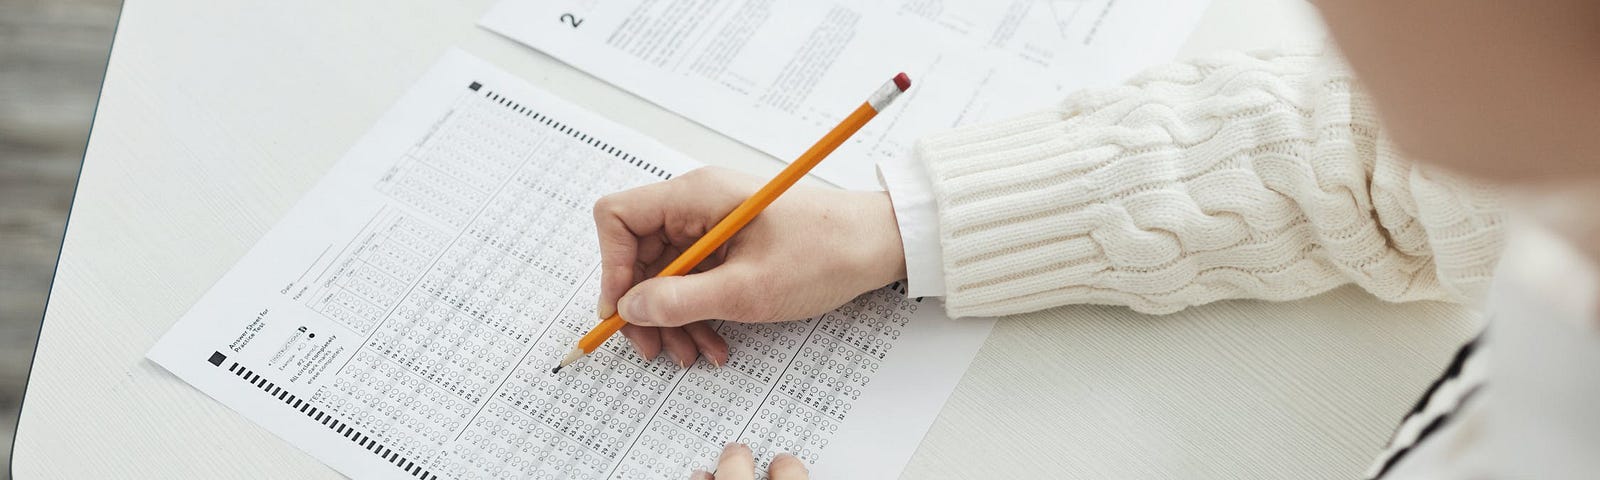 student filling out scantron test form